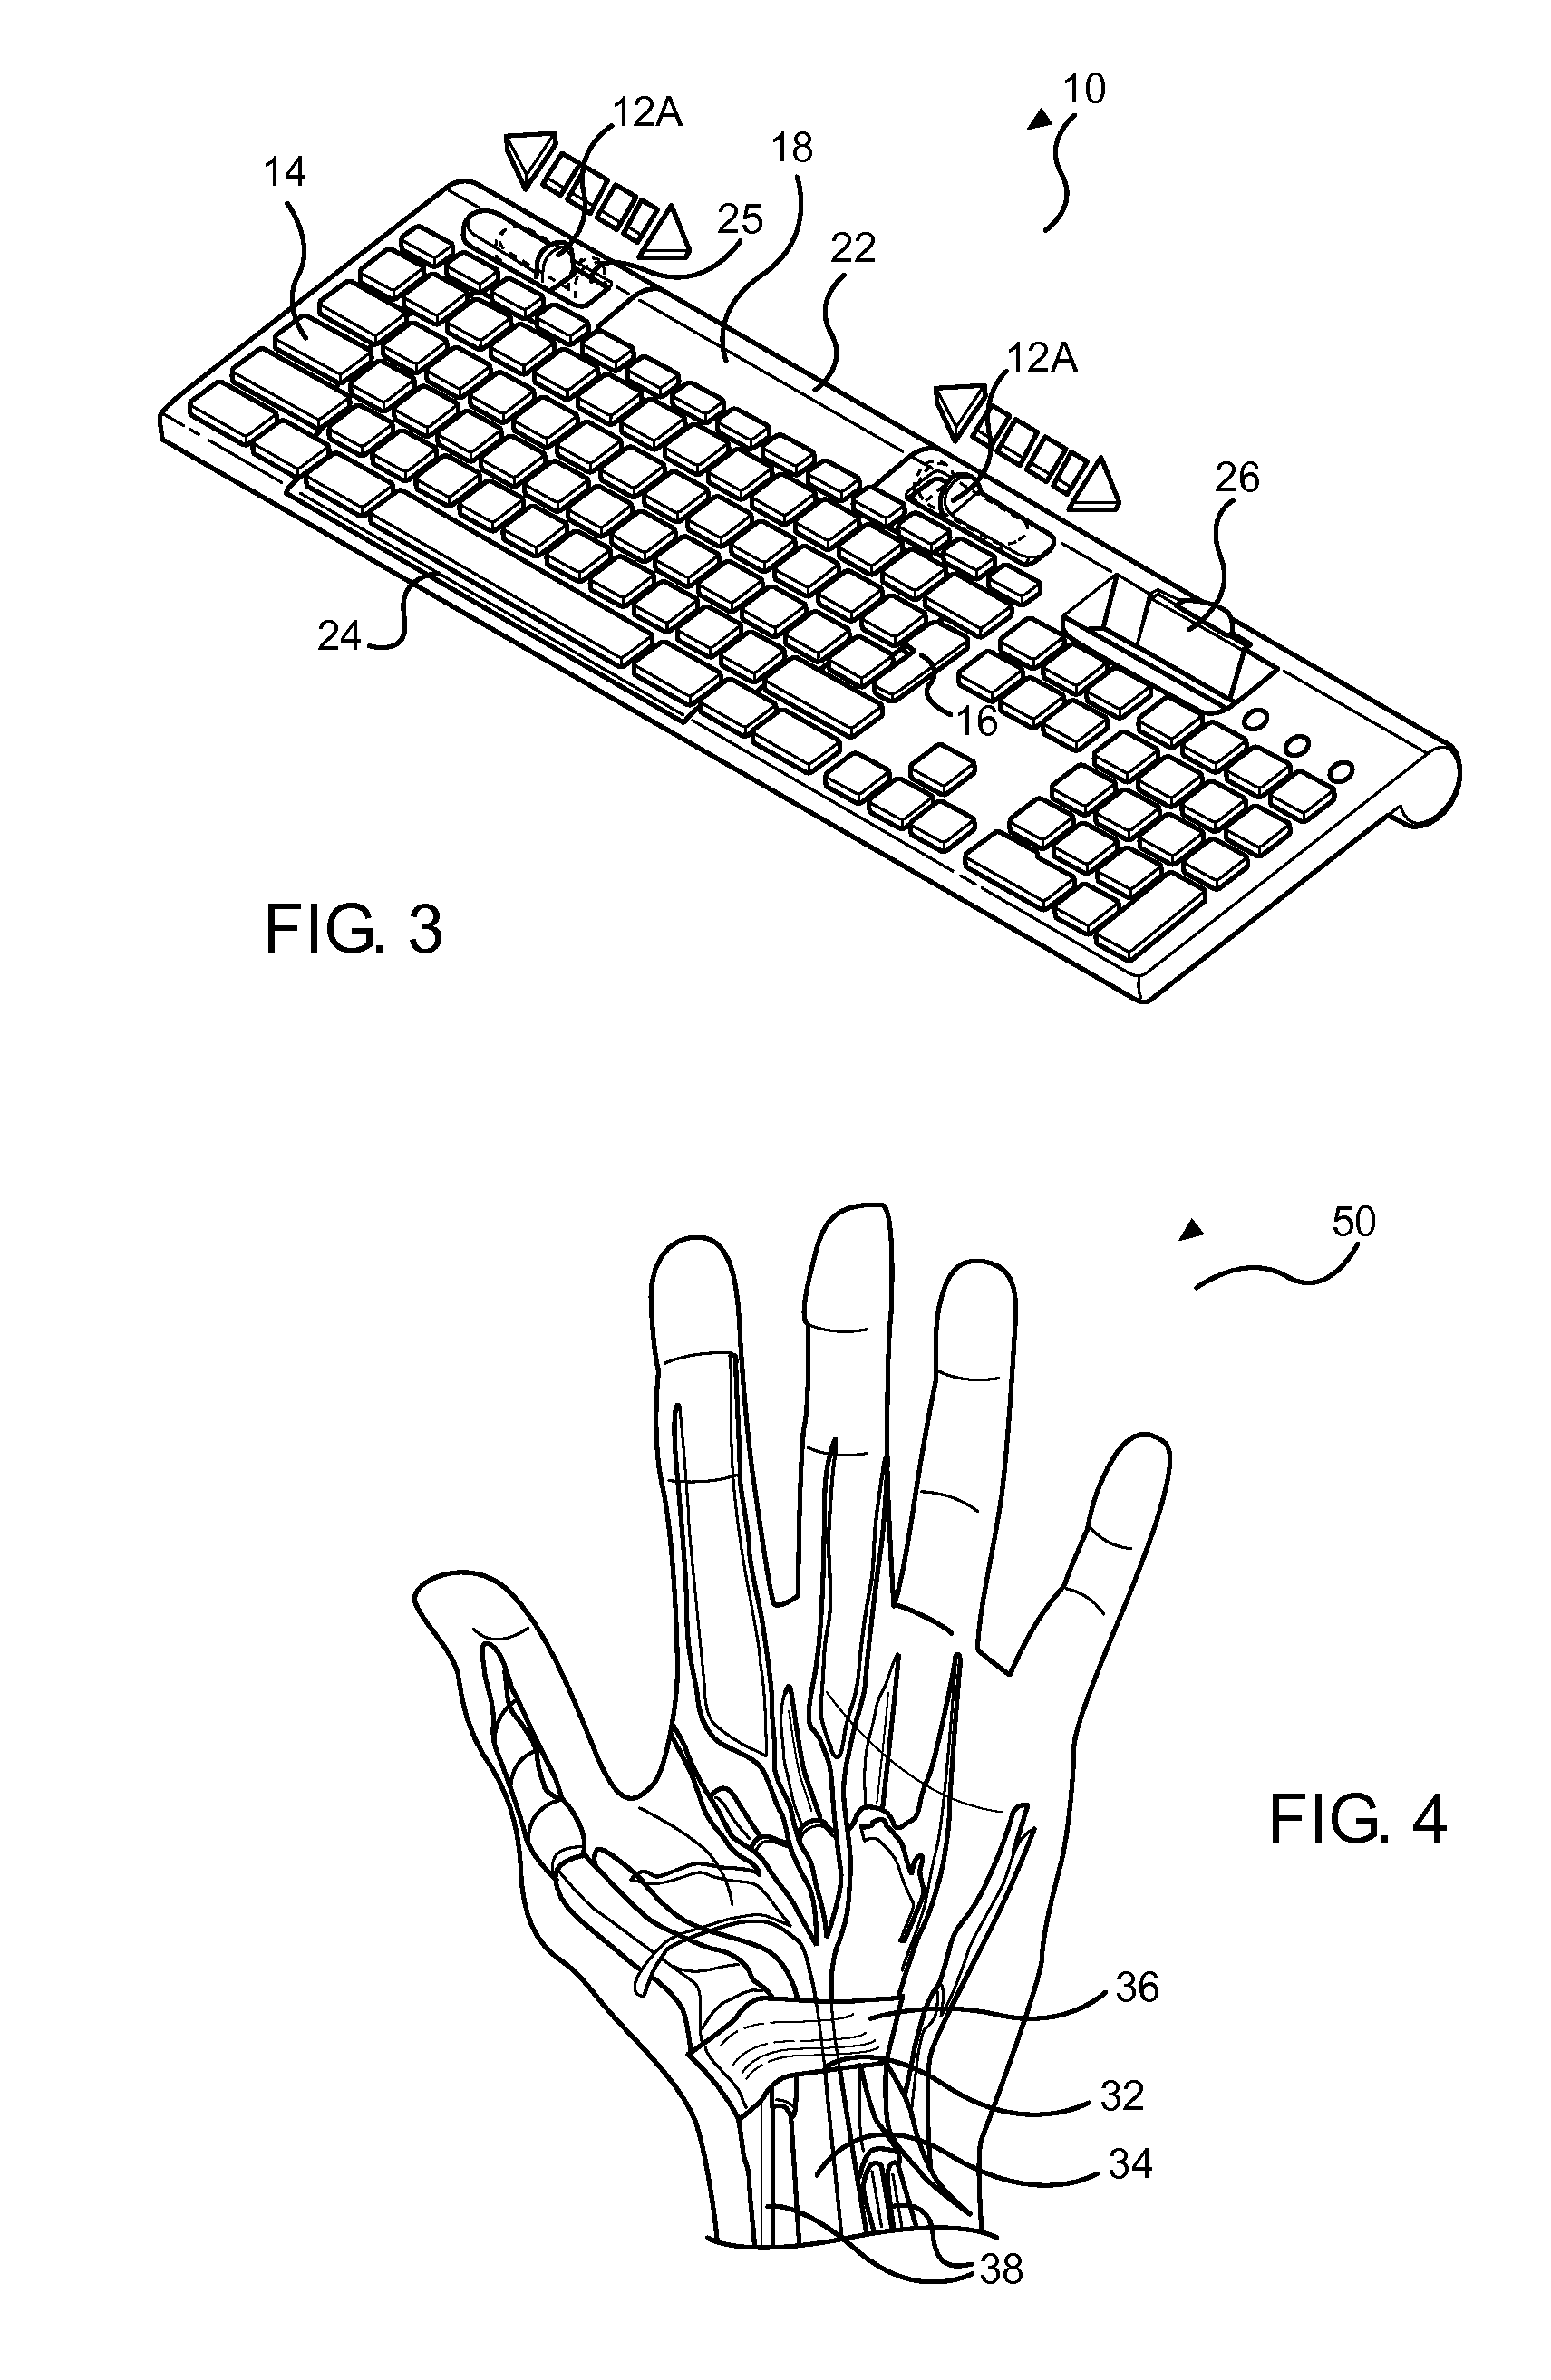 Computer Keyboard System with Alternative Exercise Capabilities for the Prevention of Repetitive Stress Injuries